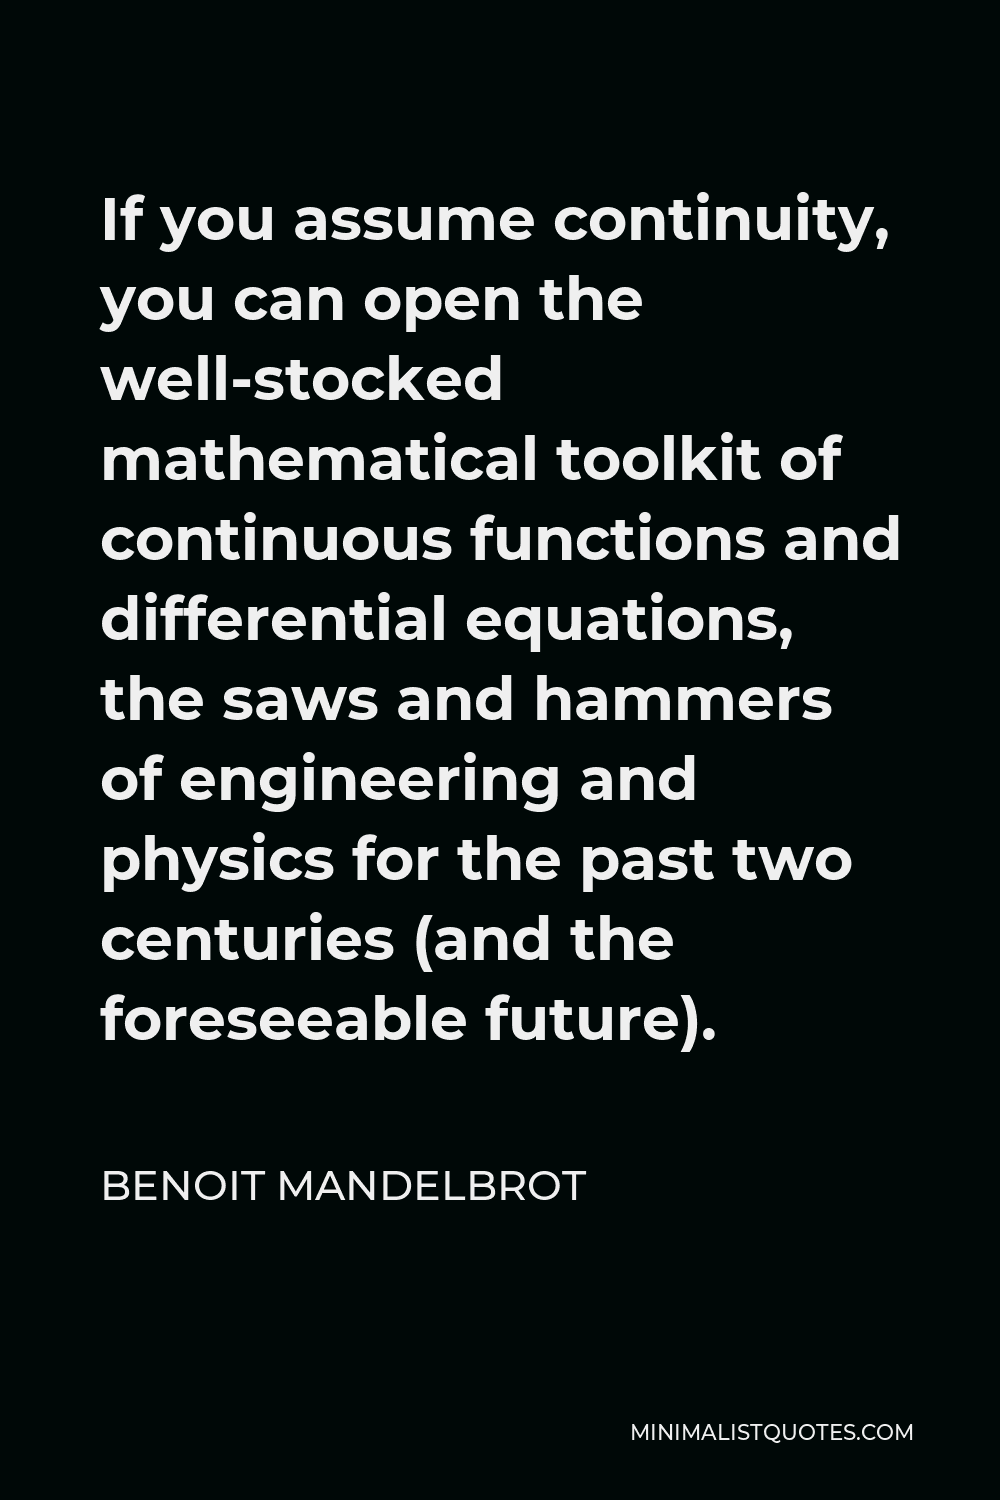 Benoit Mandelbrot Quote - If you assume continuity, you can open the well-stocked mathematical toolkit of continuous functions and differential equations, the saws and hammers of engineering and physics for the past two centuries (and the foreseeable future).